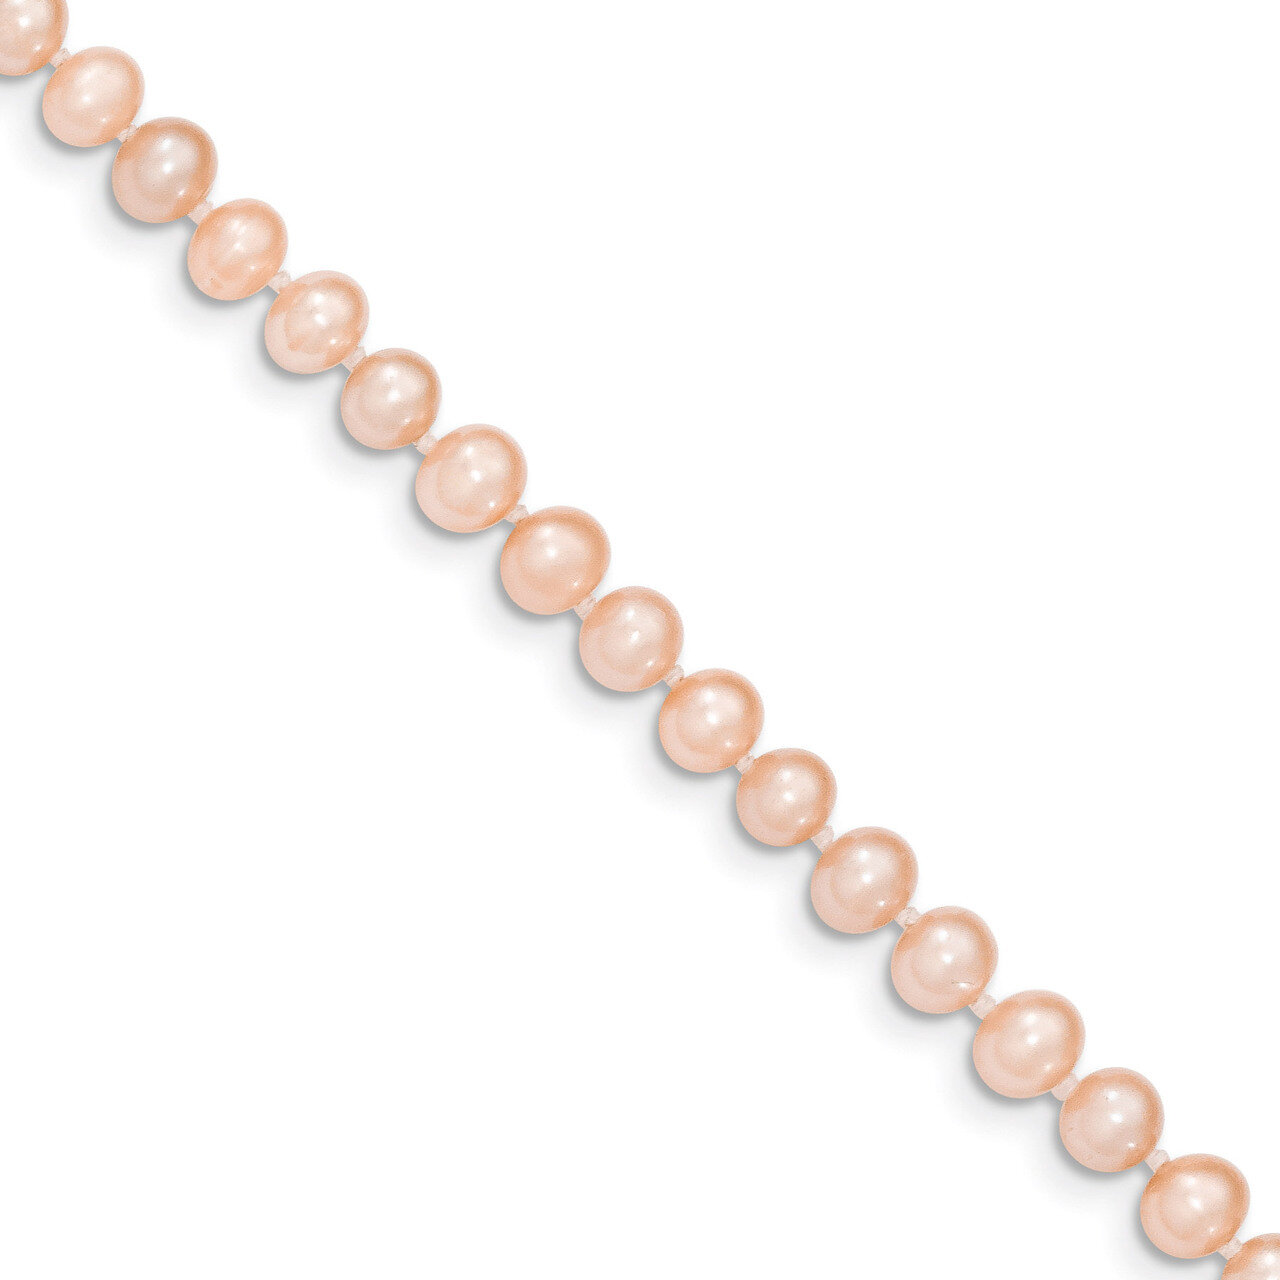 5-6mm Pink Cultured Near Round Pearl Necklace 20 Inch 14k Gold PPN050-20